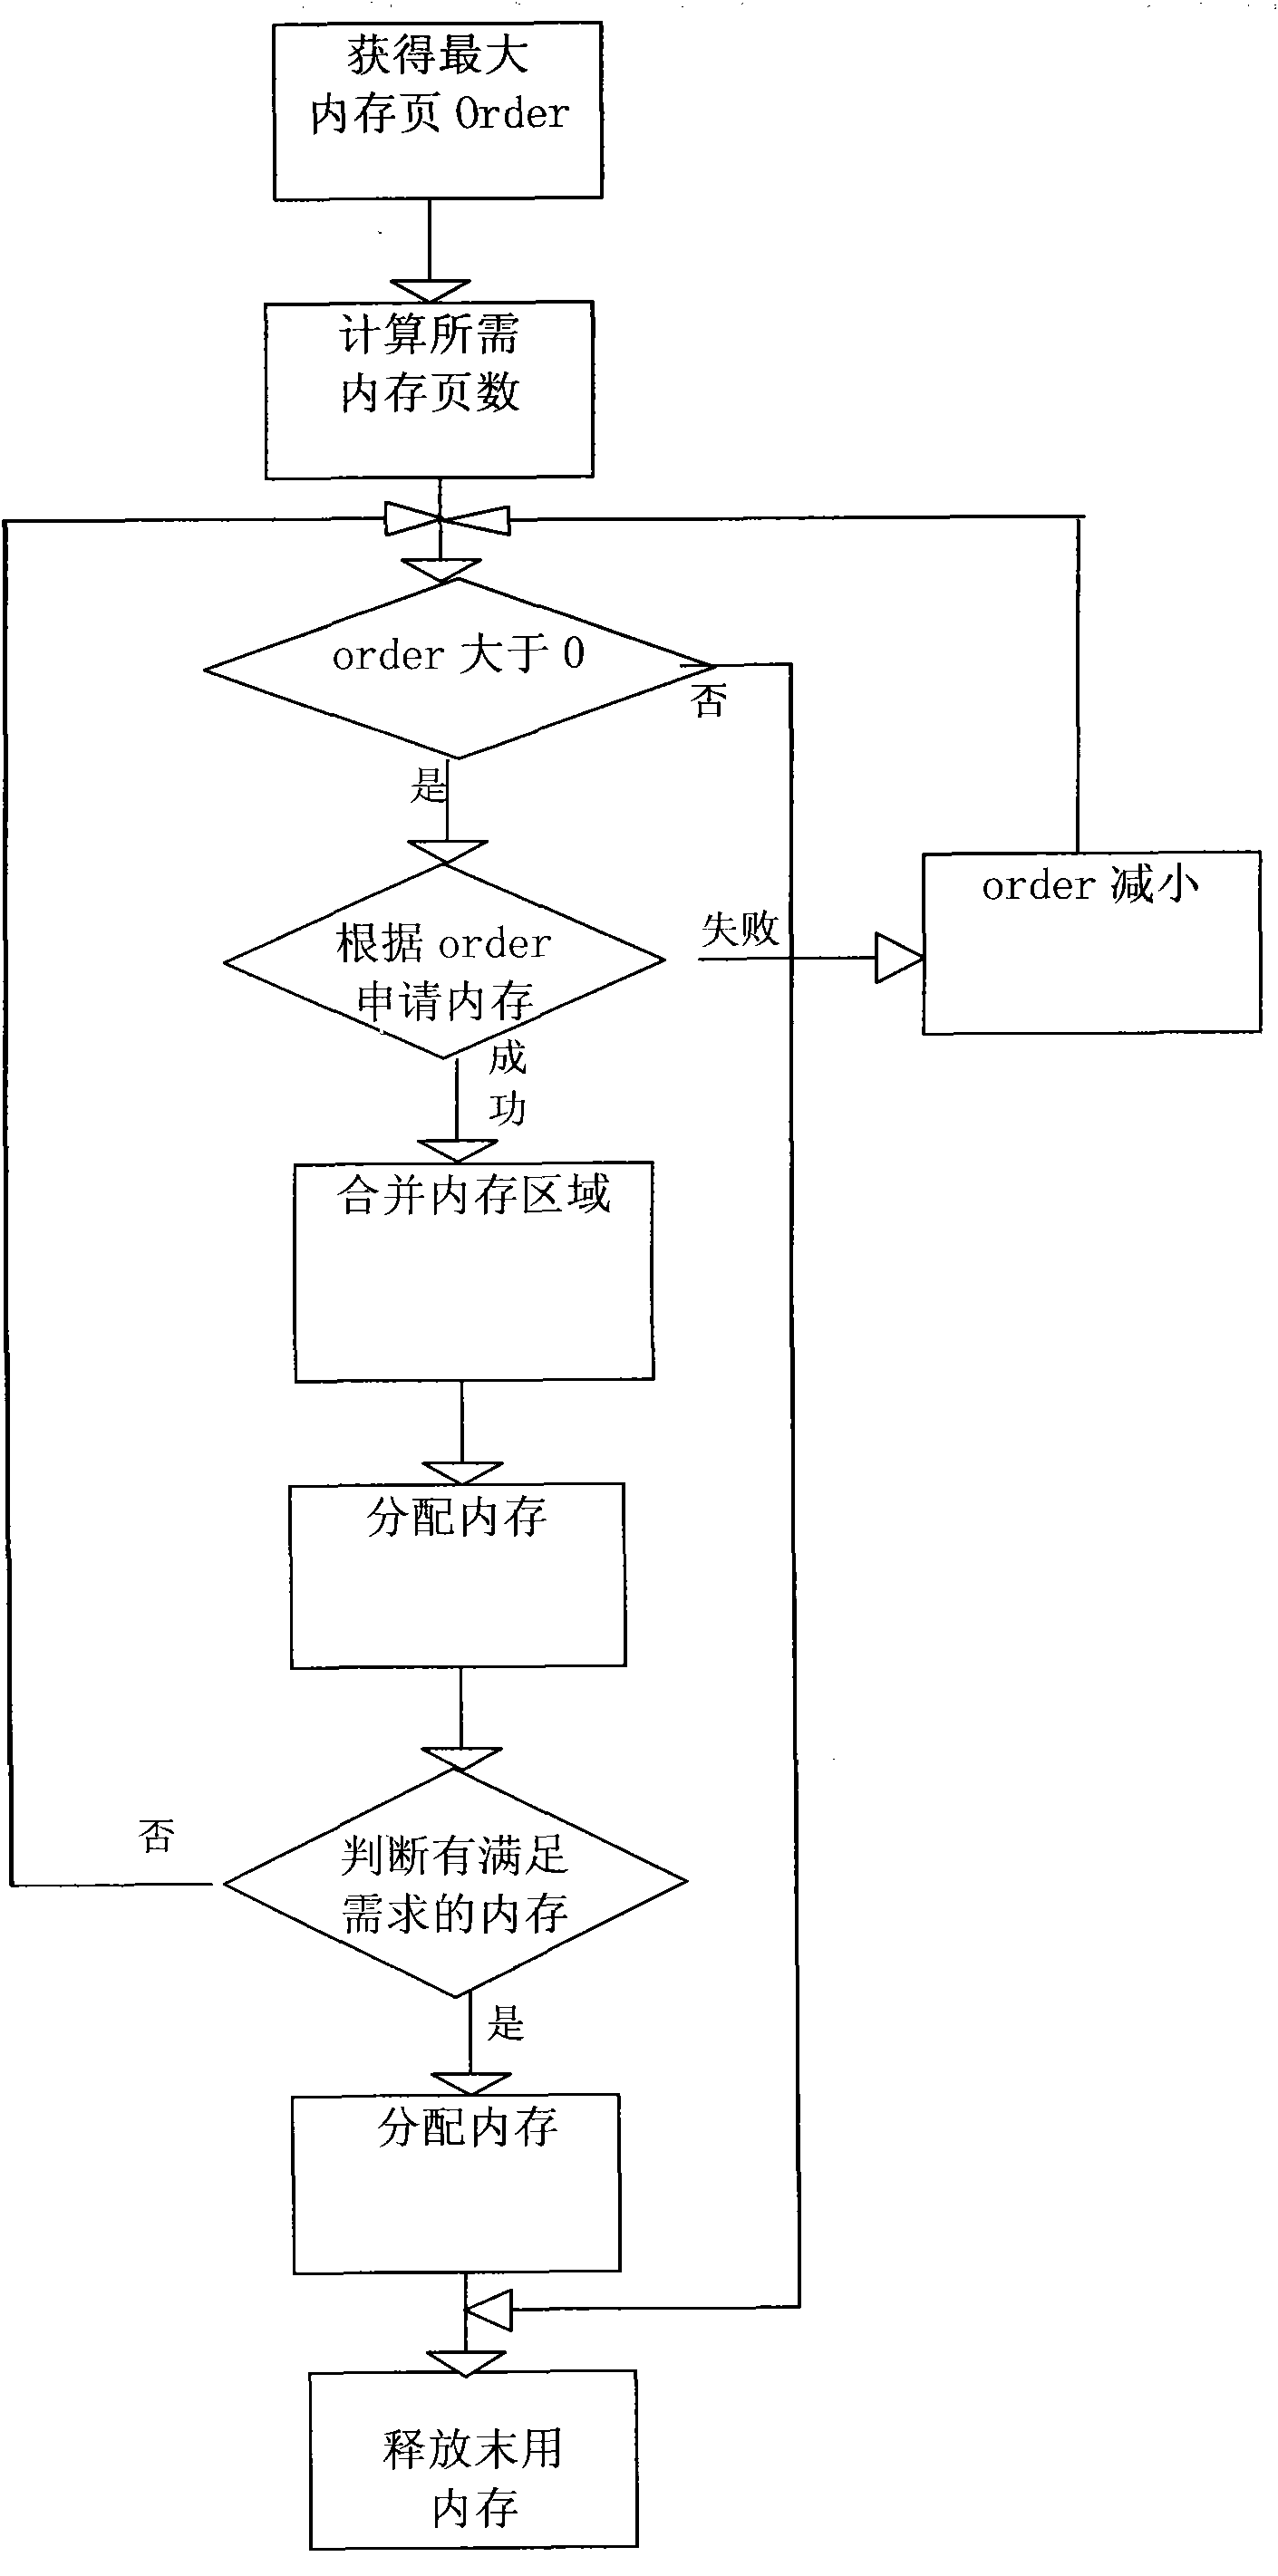 Method for distributing large continuous memory of kernel